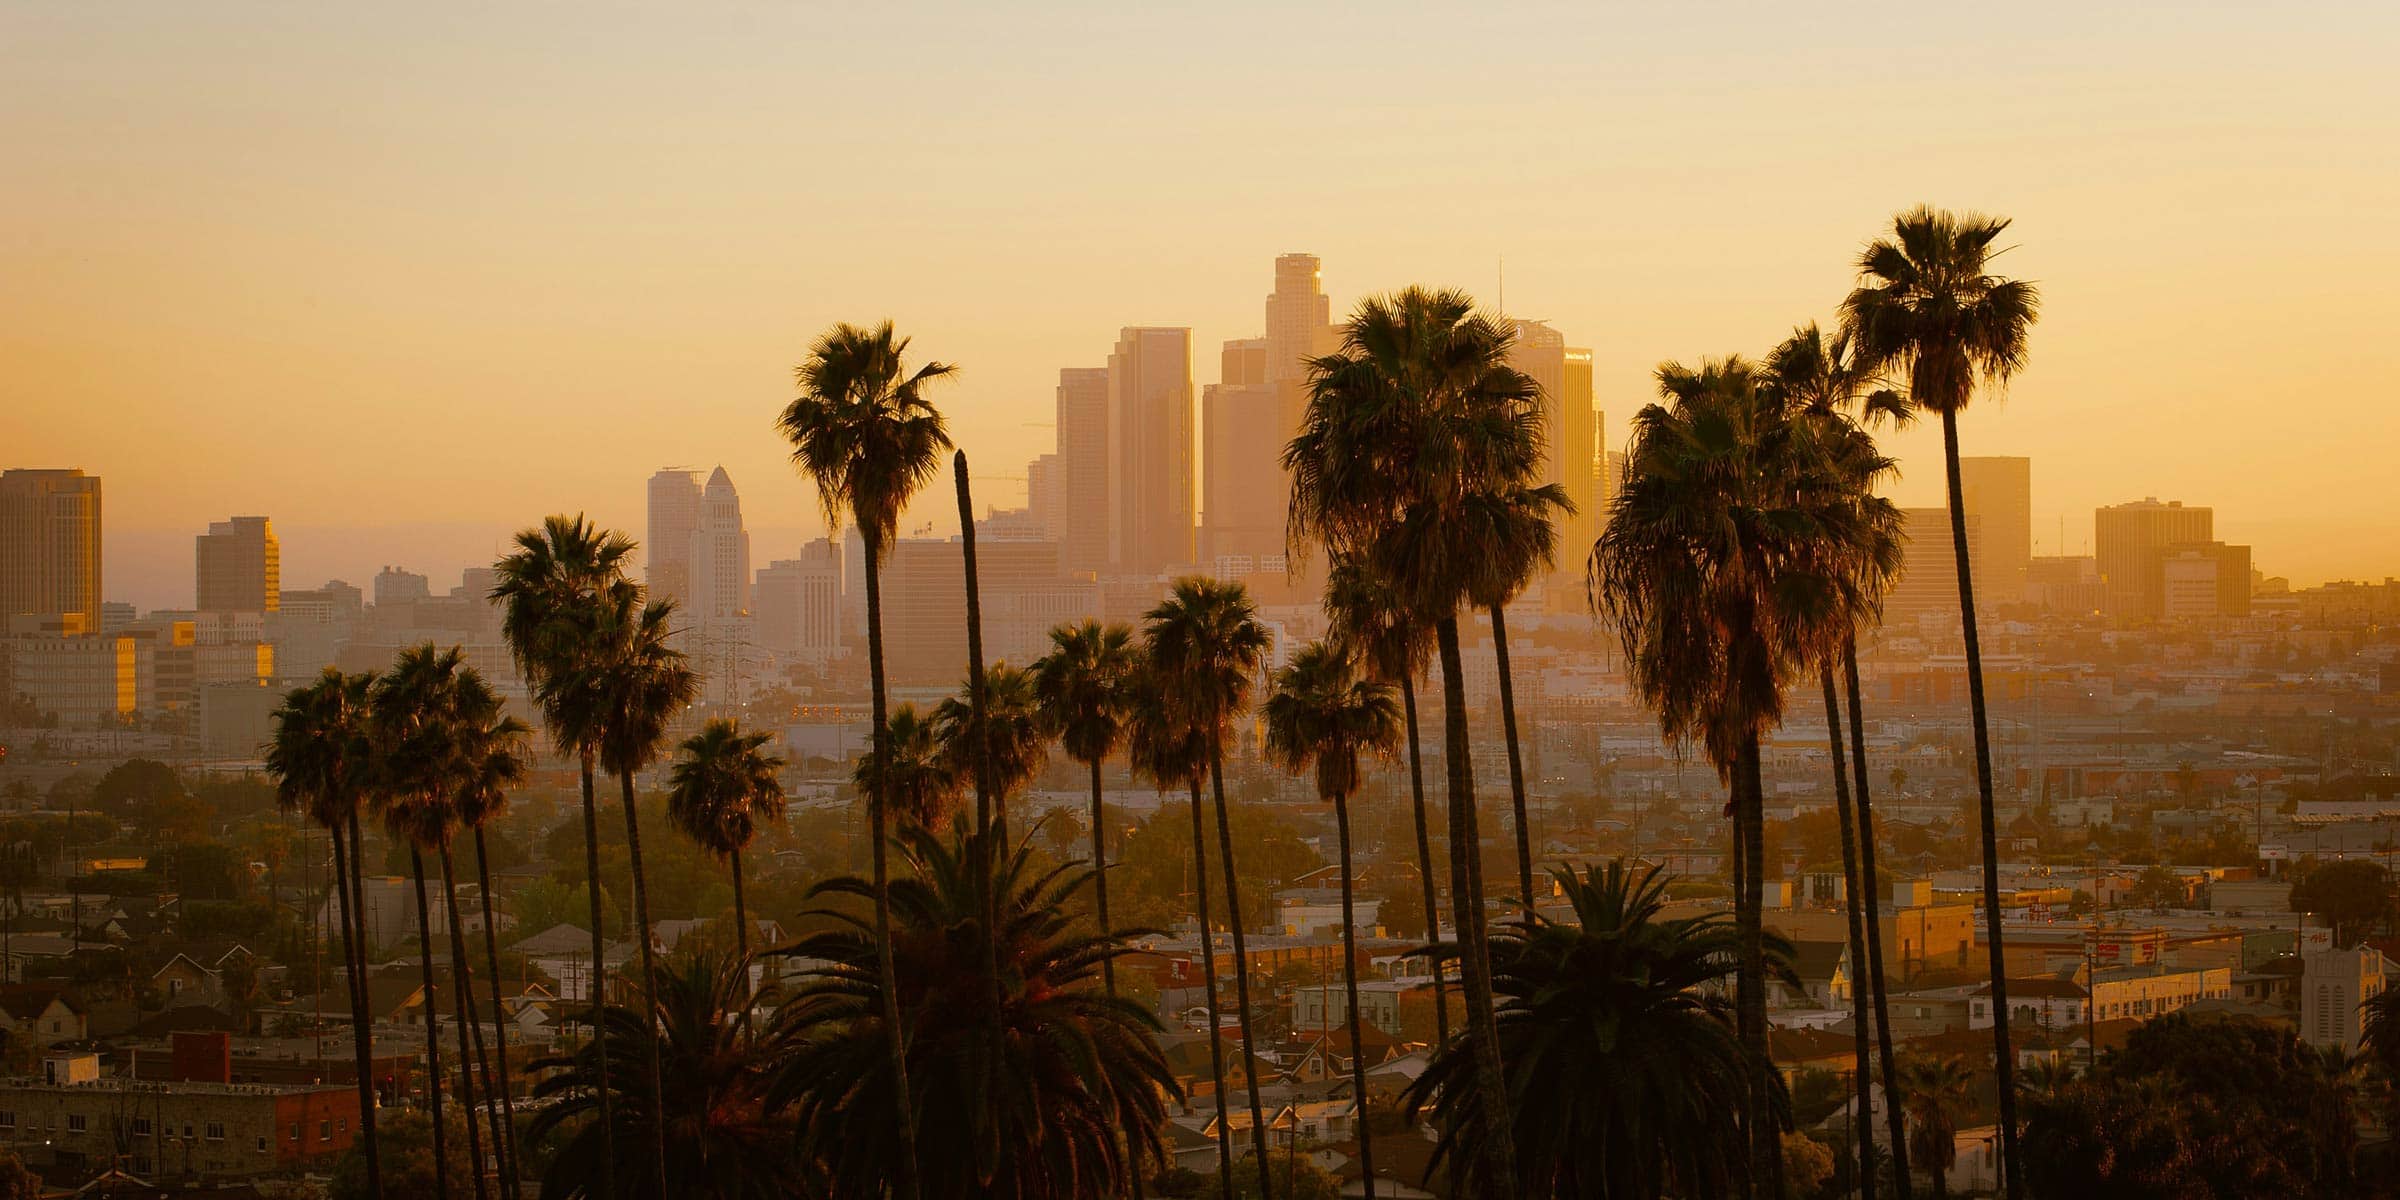 Los Angeles with palm trees in the foreground and skyscapers in the background